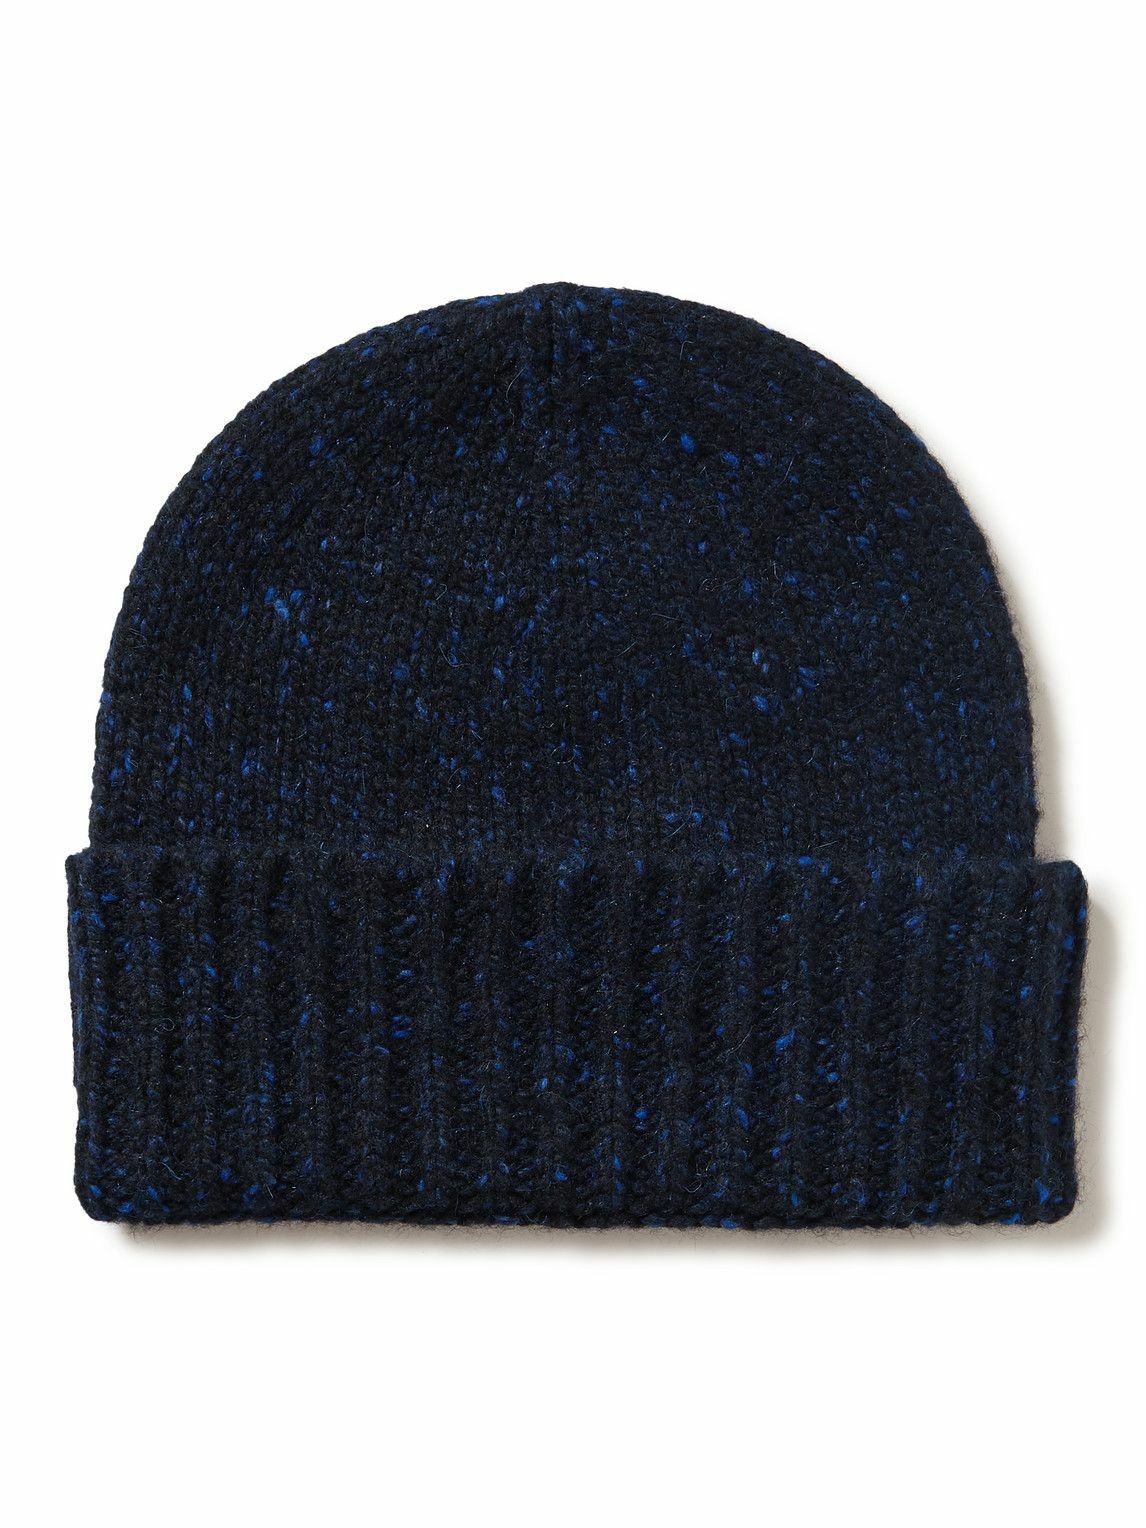 Photo: Johnstons of Elgin - Ribbed Cashmere Beanie